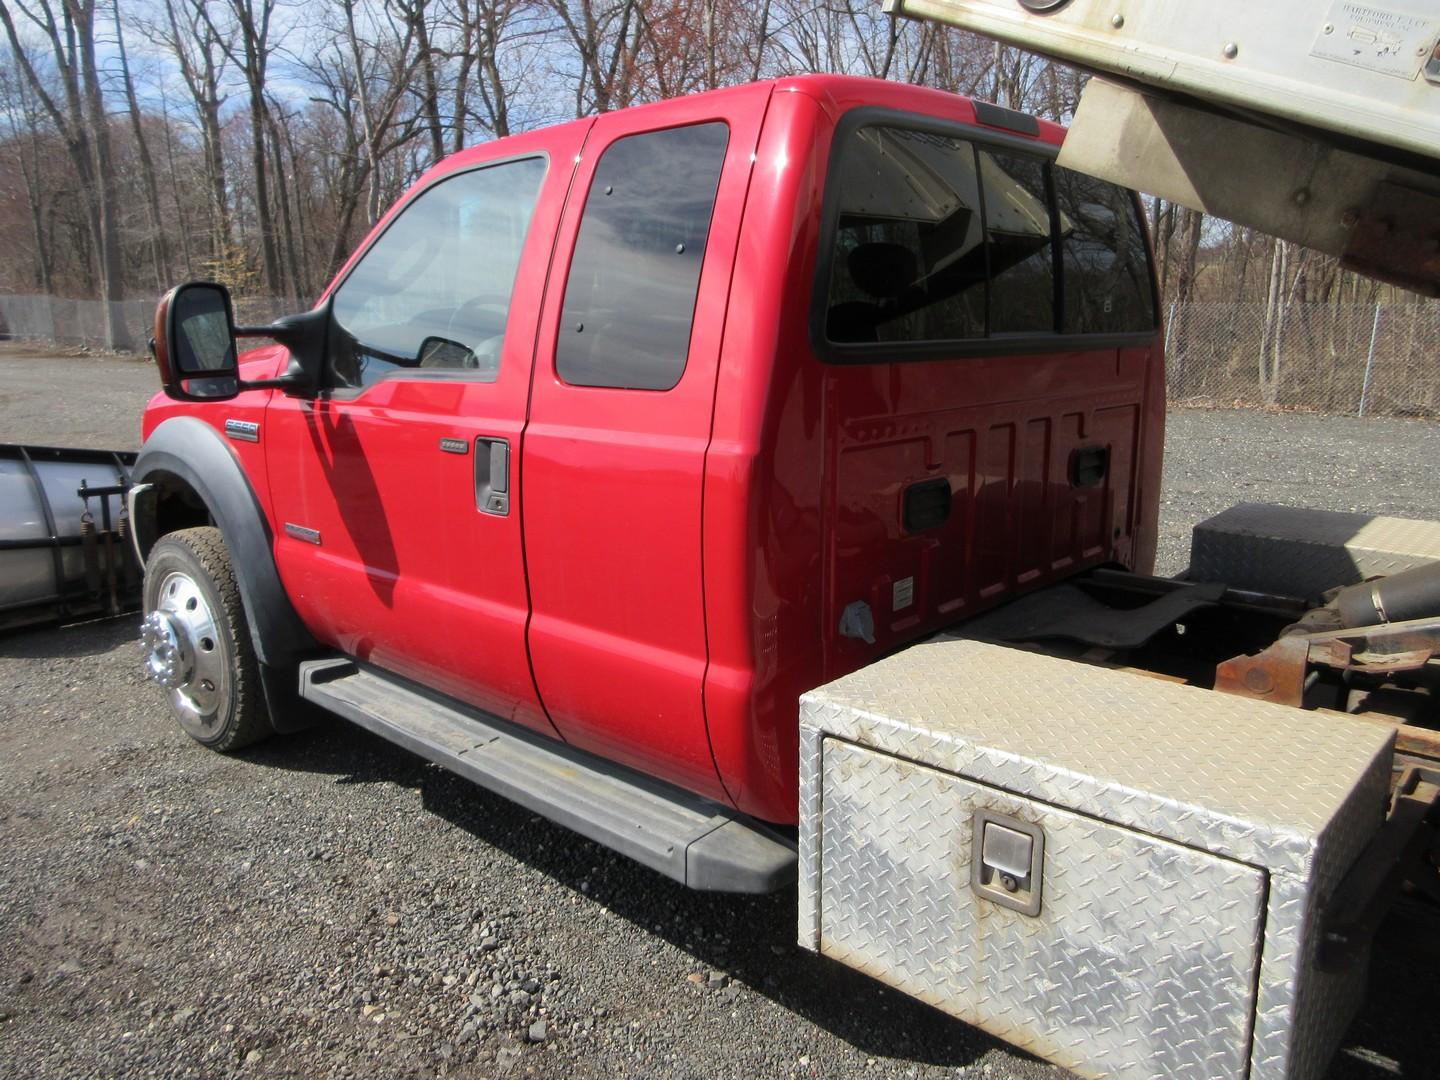 2007 Ford F-550 XLT S/A Flatbed Dump Truck